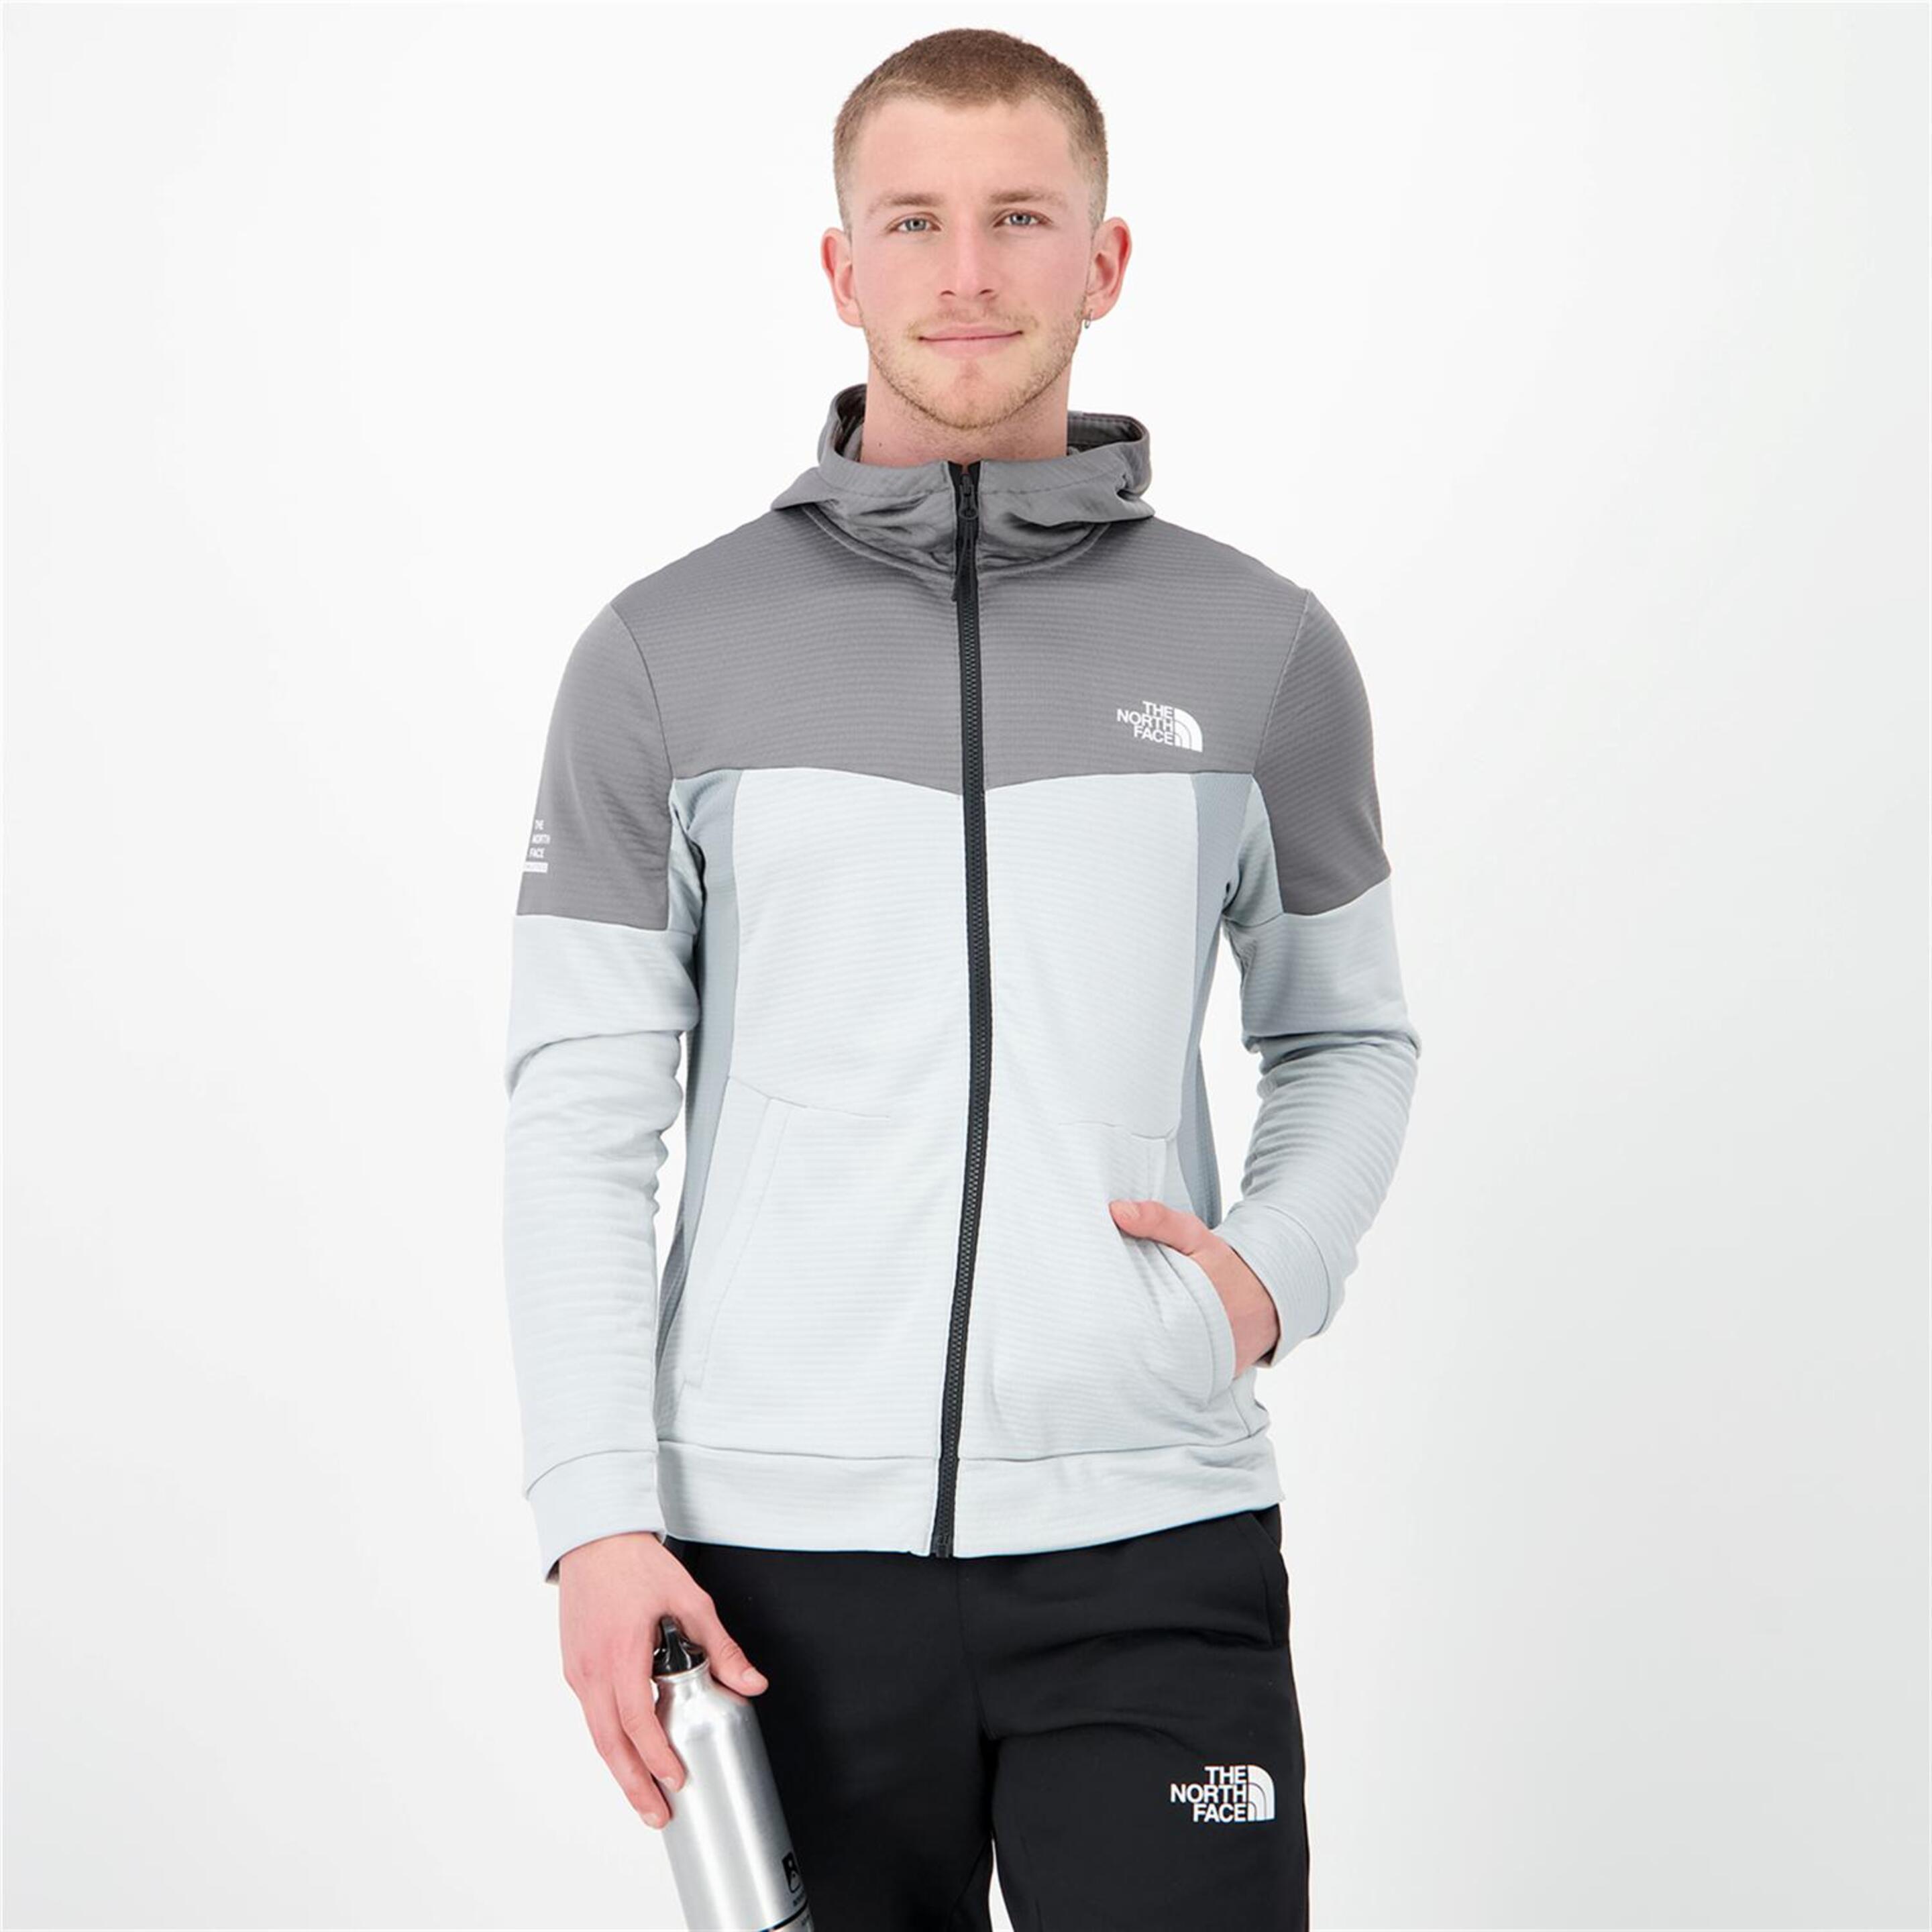 The North Face Ma - gris - Sudadera Trekking Hombre